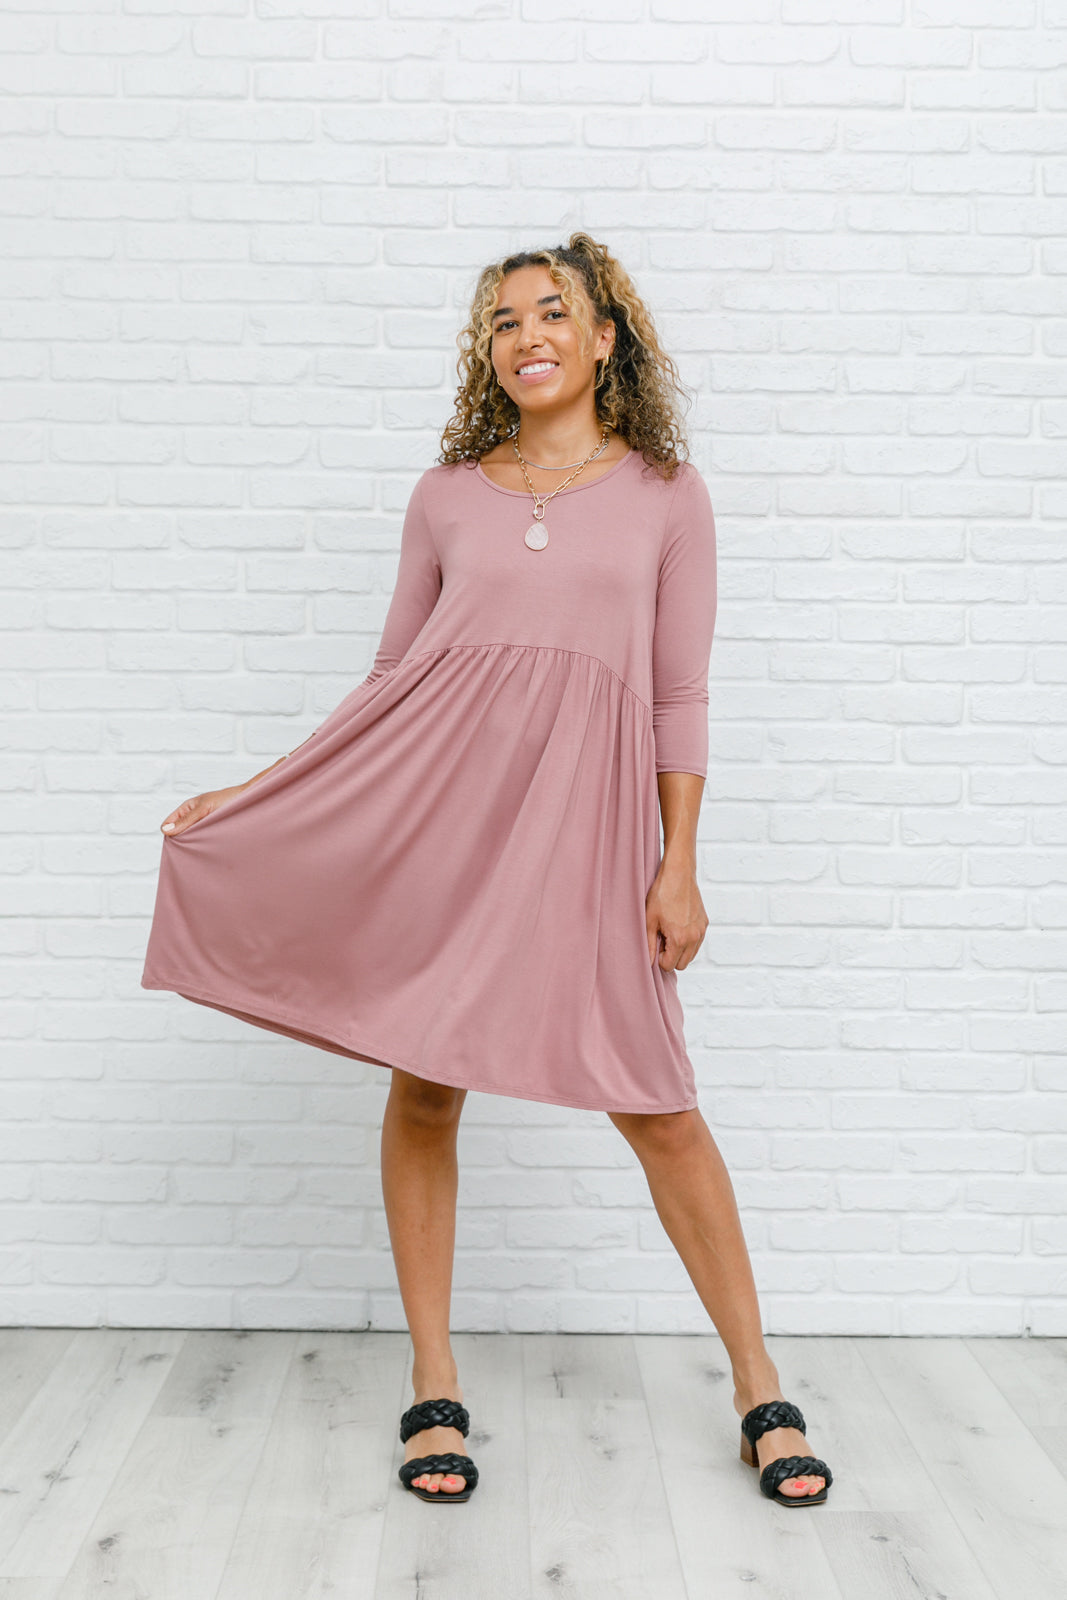 Weekender Dress In Mauve-Womens-Graceful & Chic Boutique, Family Clothing Store in Waxahachie, Texas